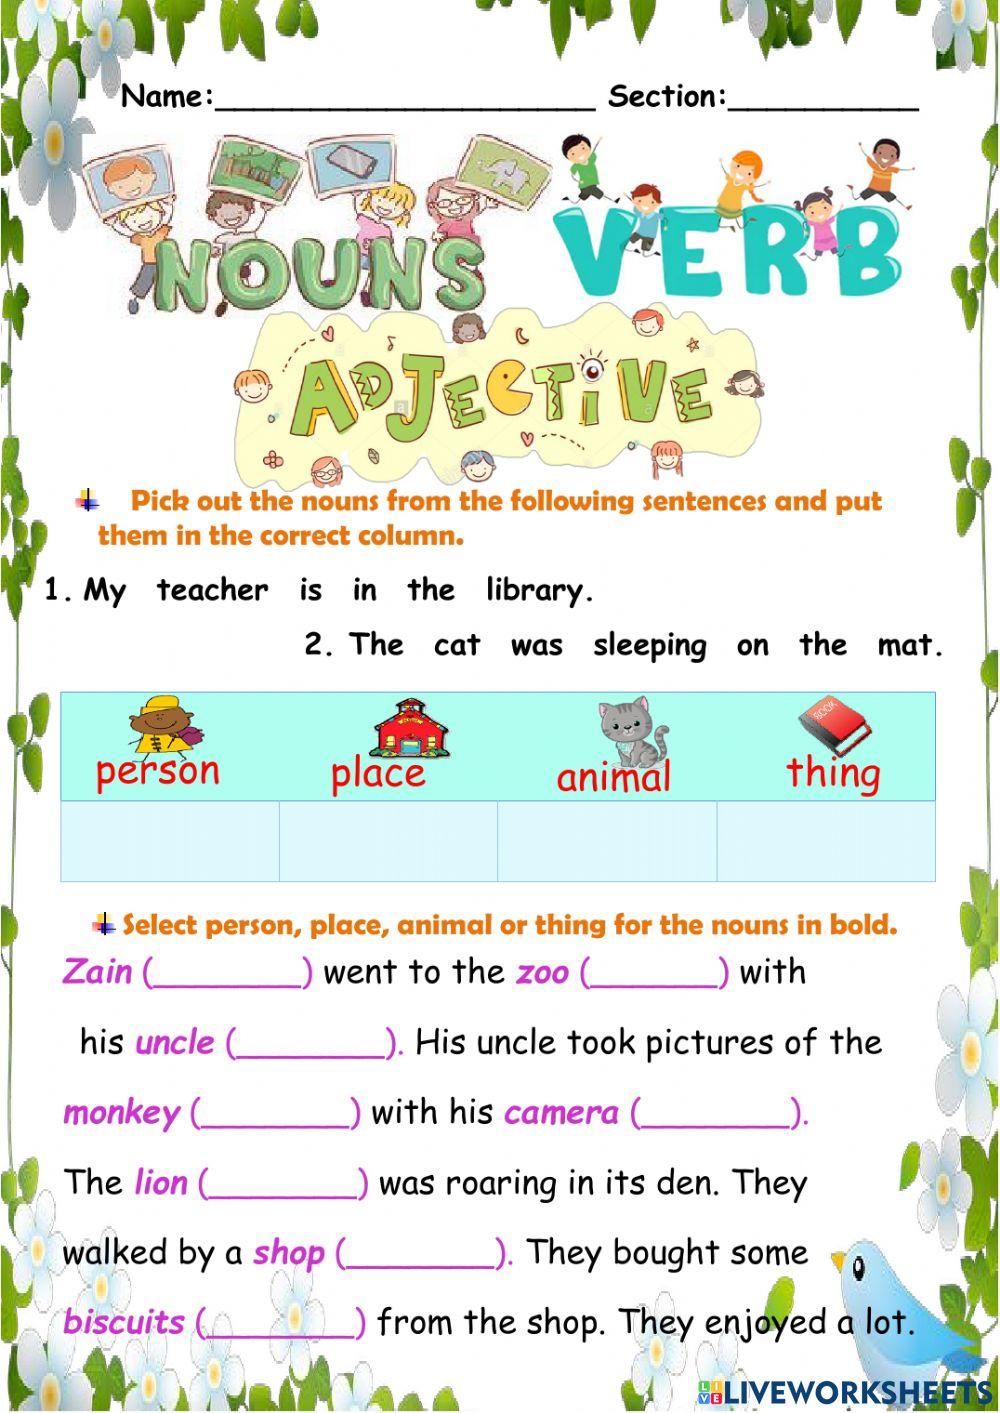 Nouns, Verbs and Adjectives